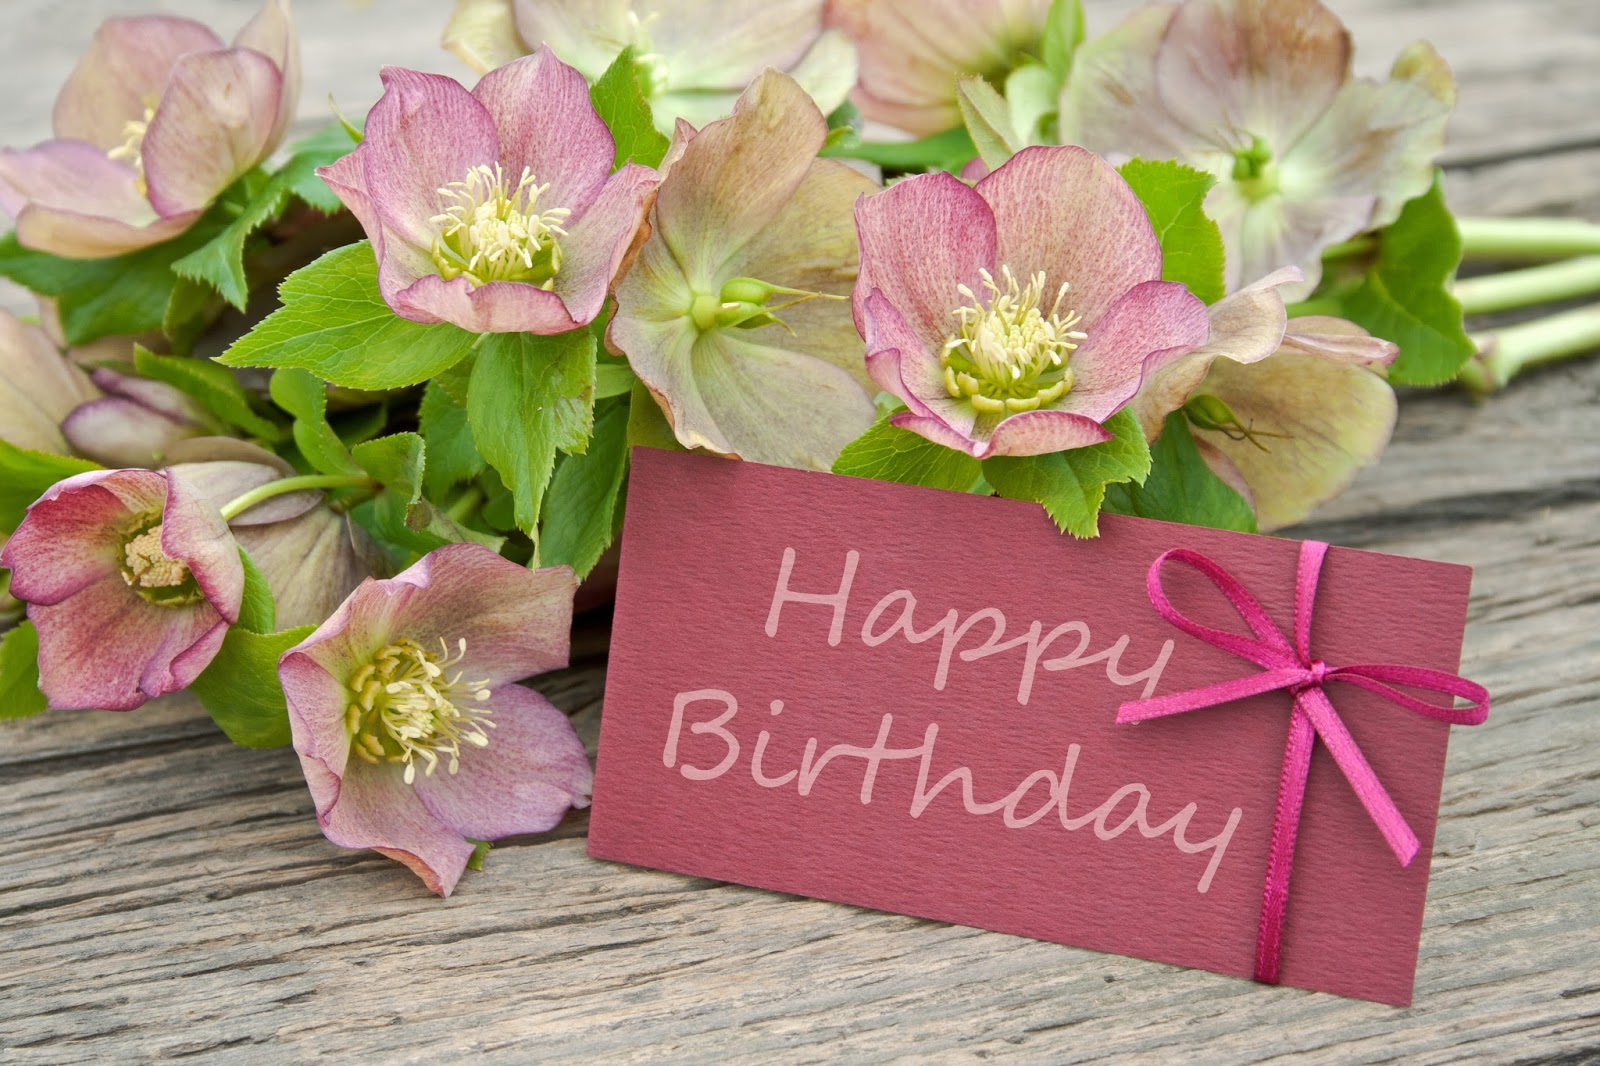 Best Birthday Flowers Images :: Birthday Wishes & Bouquet Delivery ...